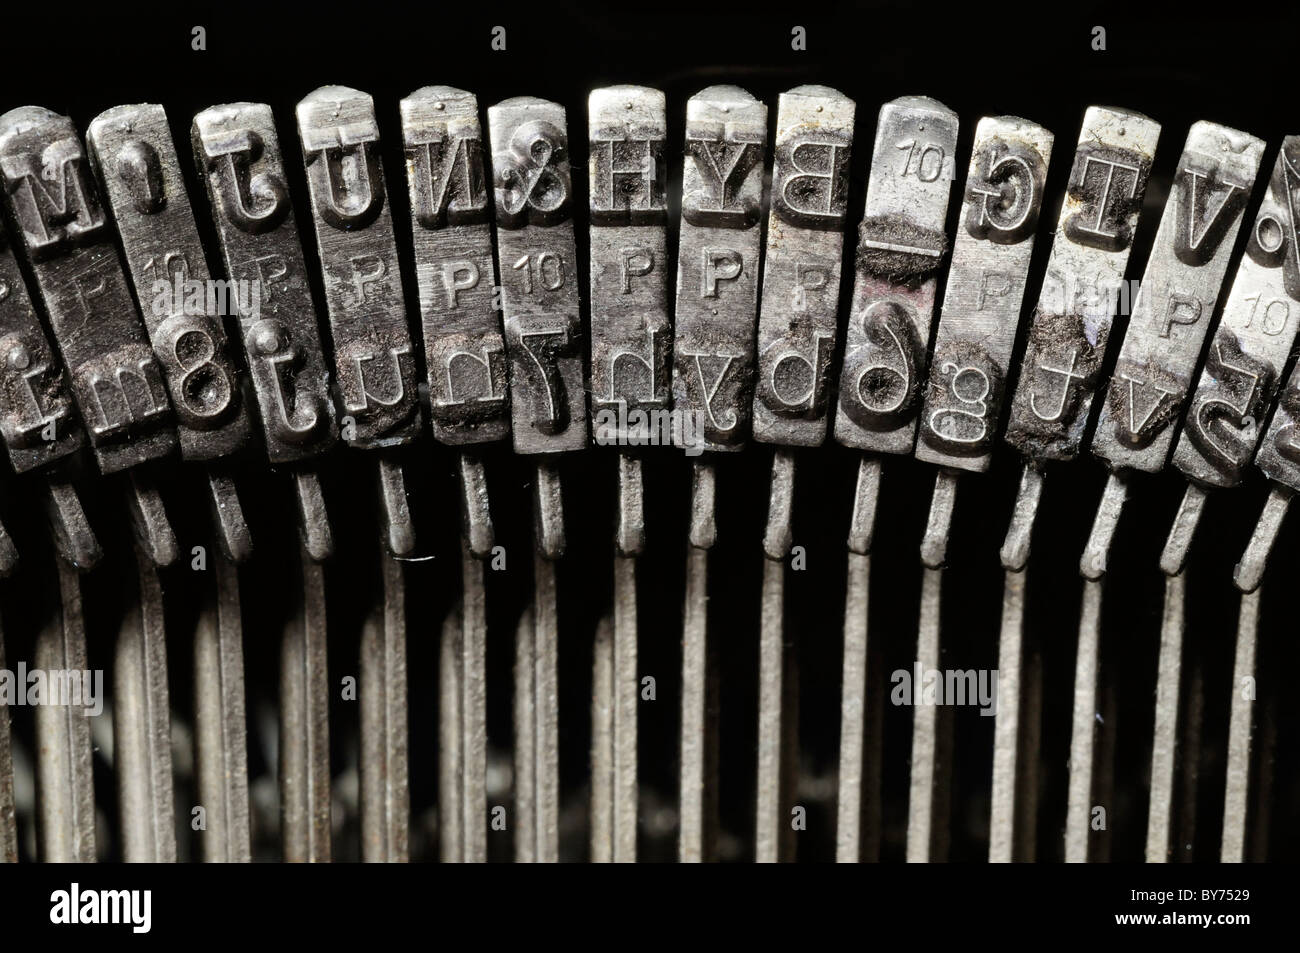 Close-up of old typewriter letter and symbol keys Stock Photo